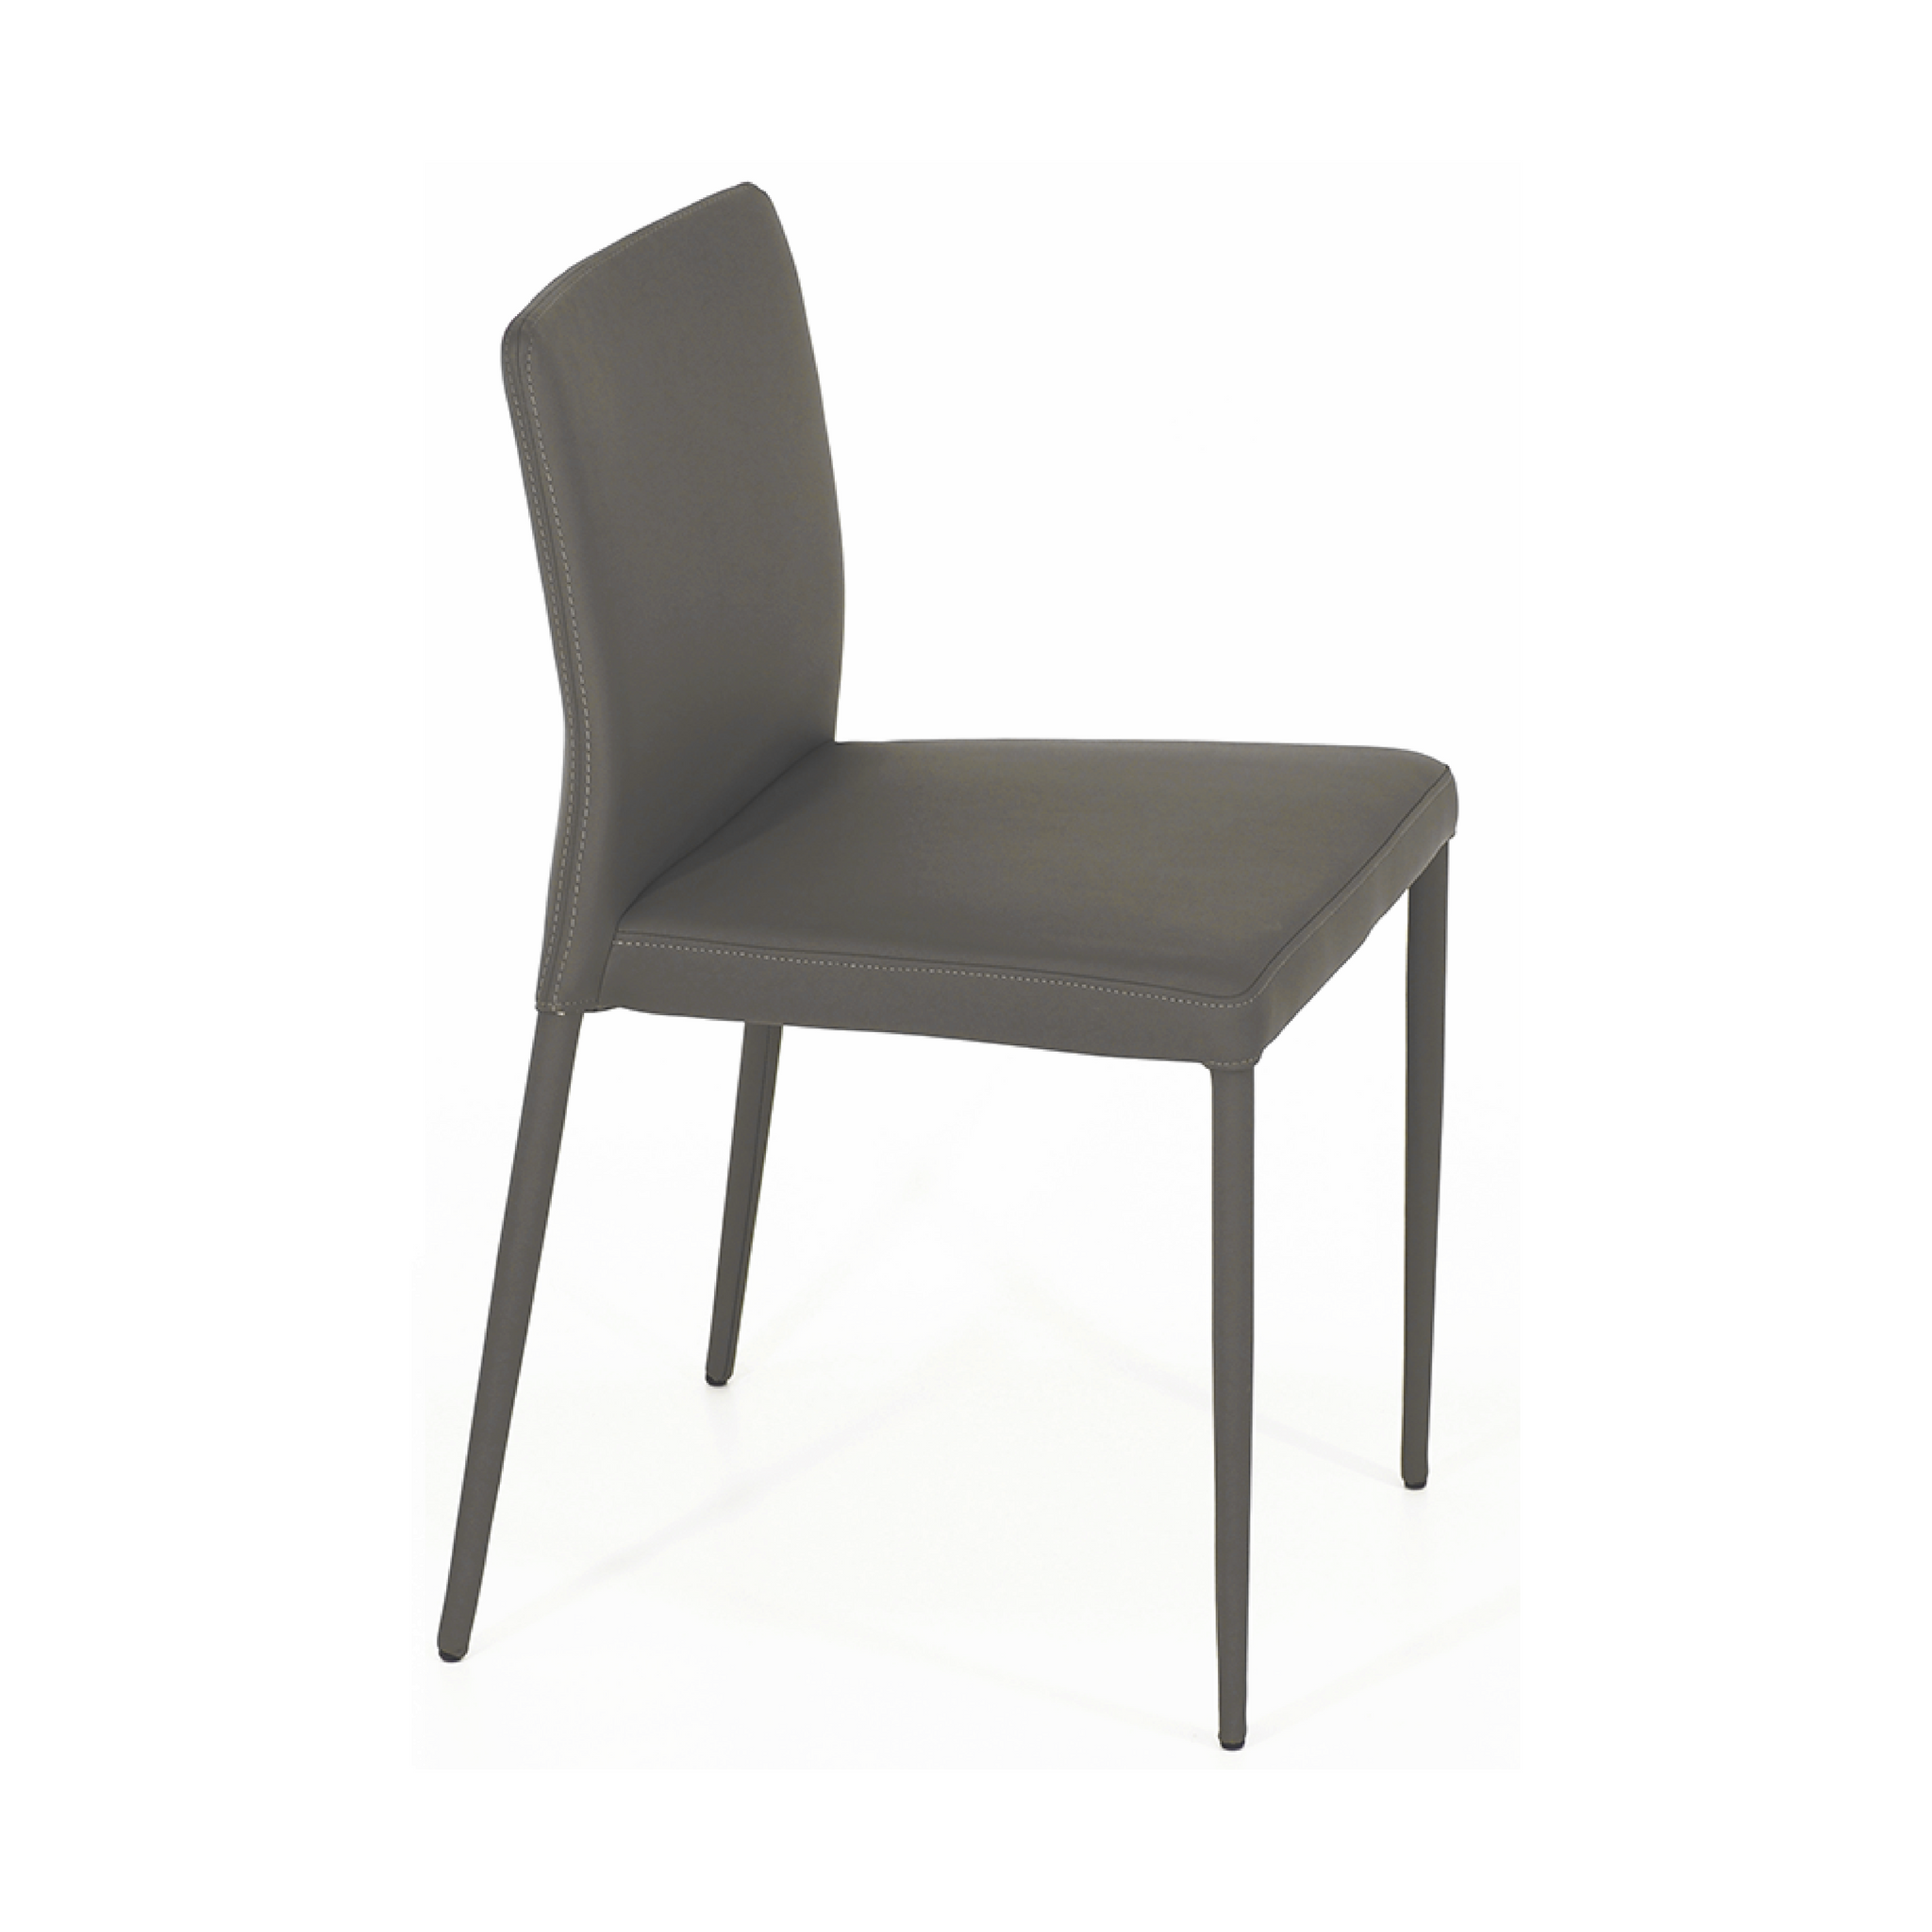 Fusion Chair in grey